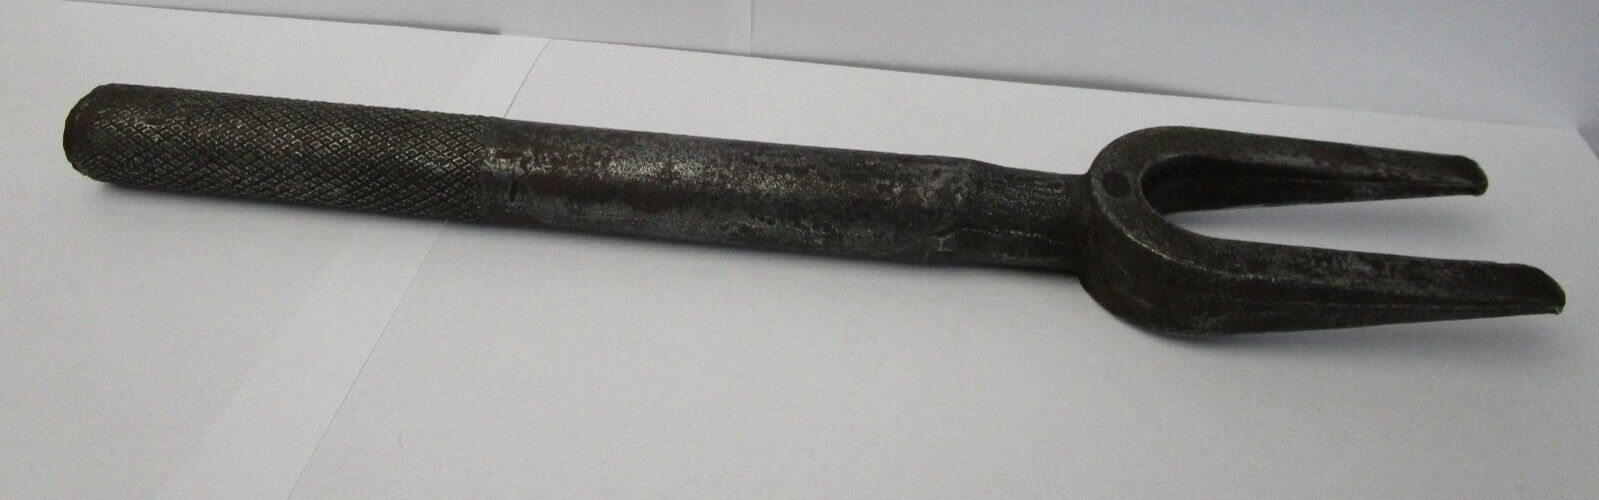 OLD FORGE PICKLE FORK TIE ROD BALL JOINT SEPARATOR TOOL 2503 12\